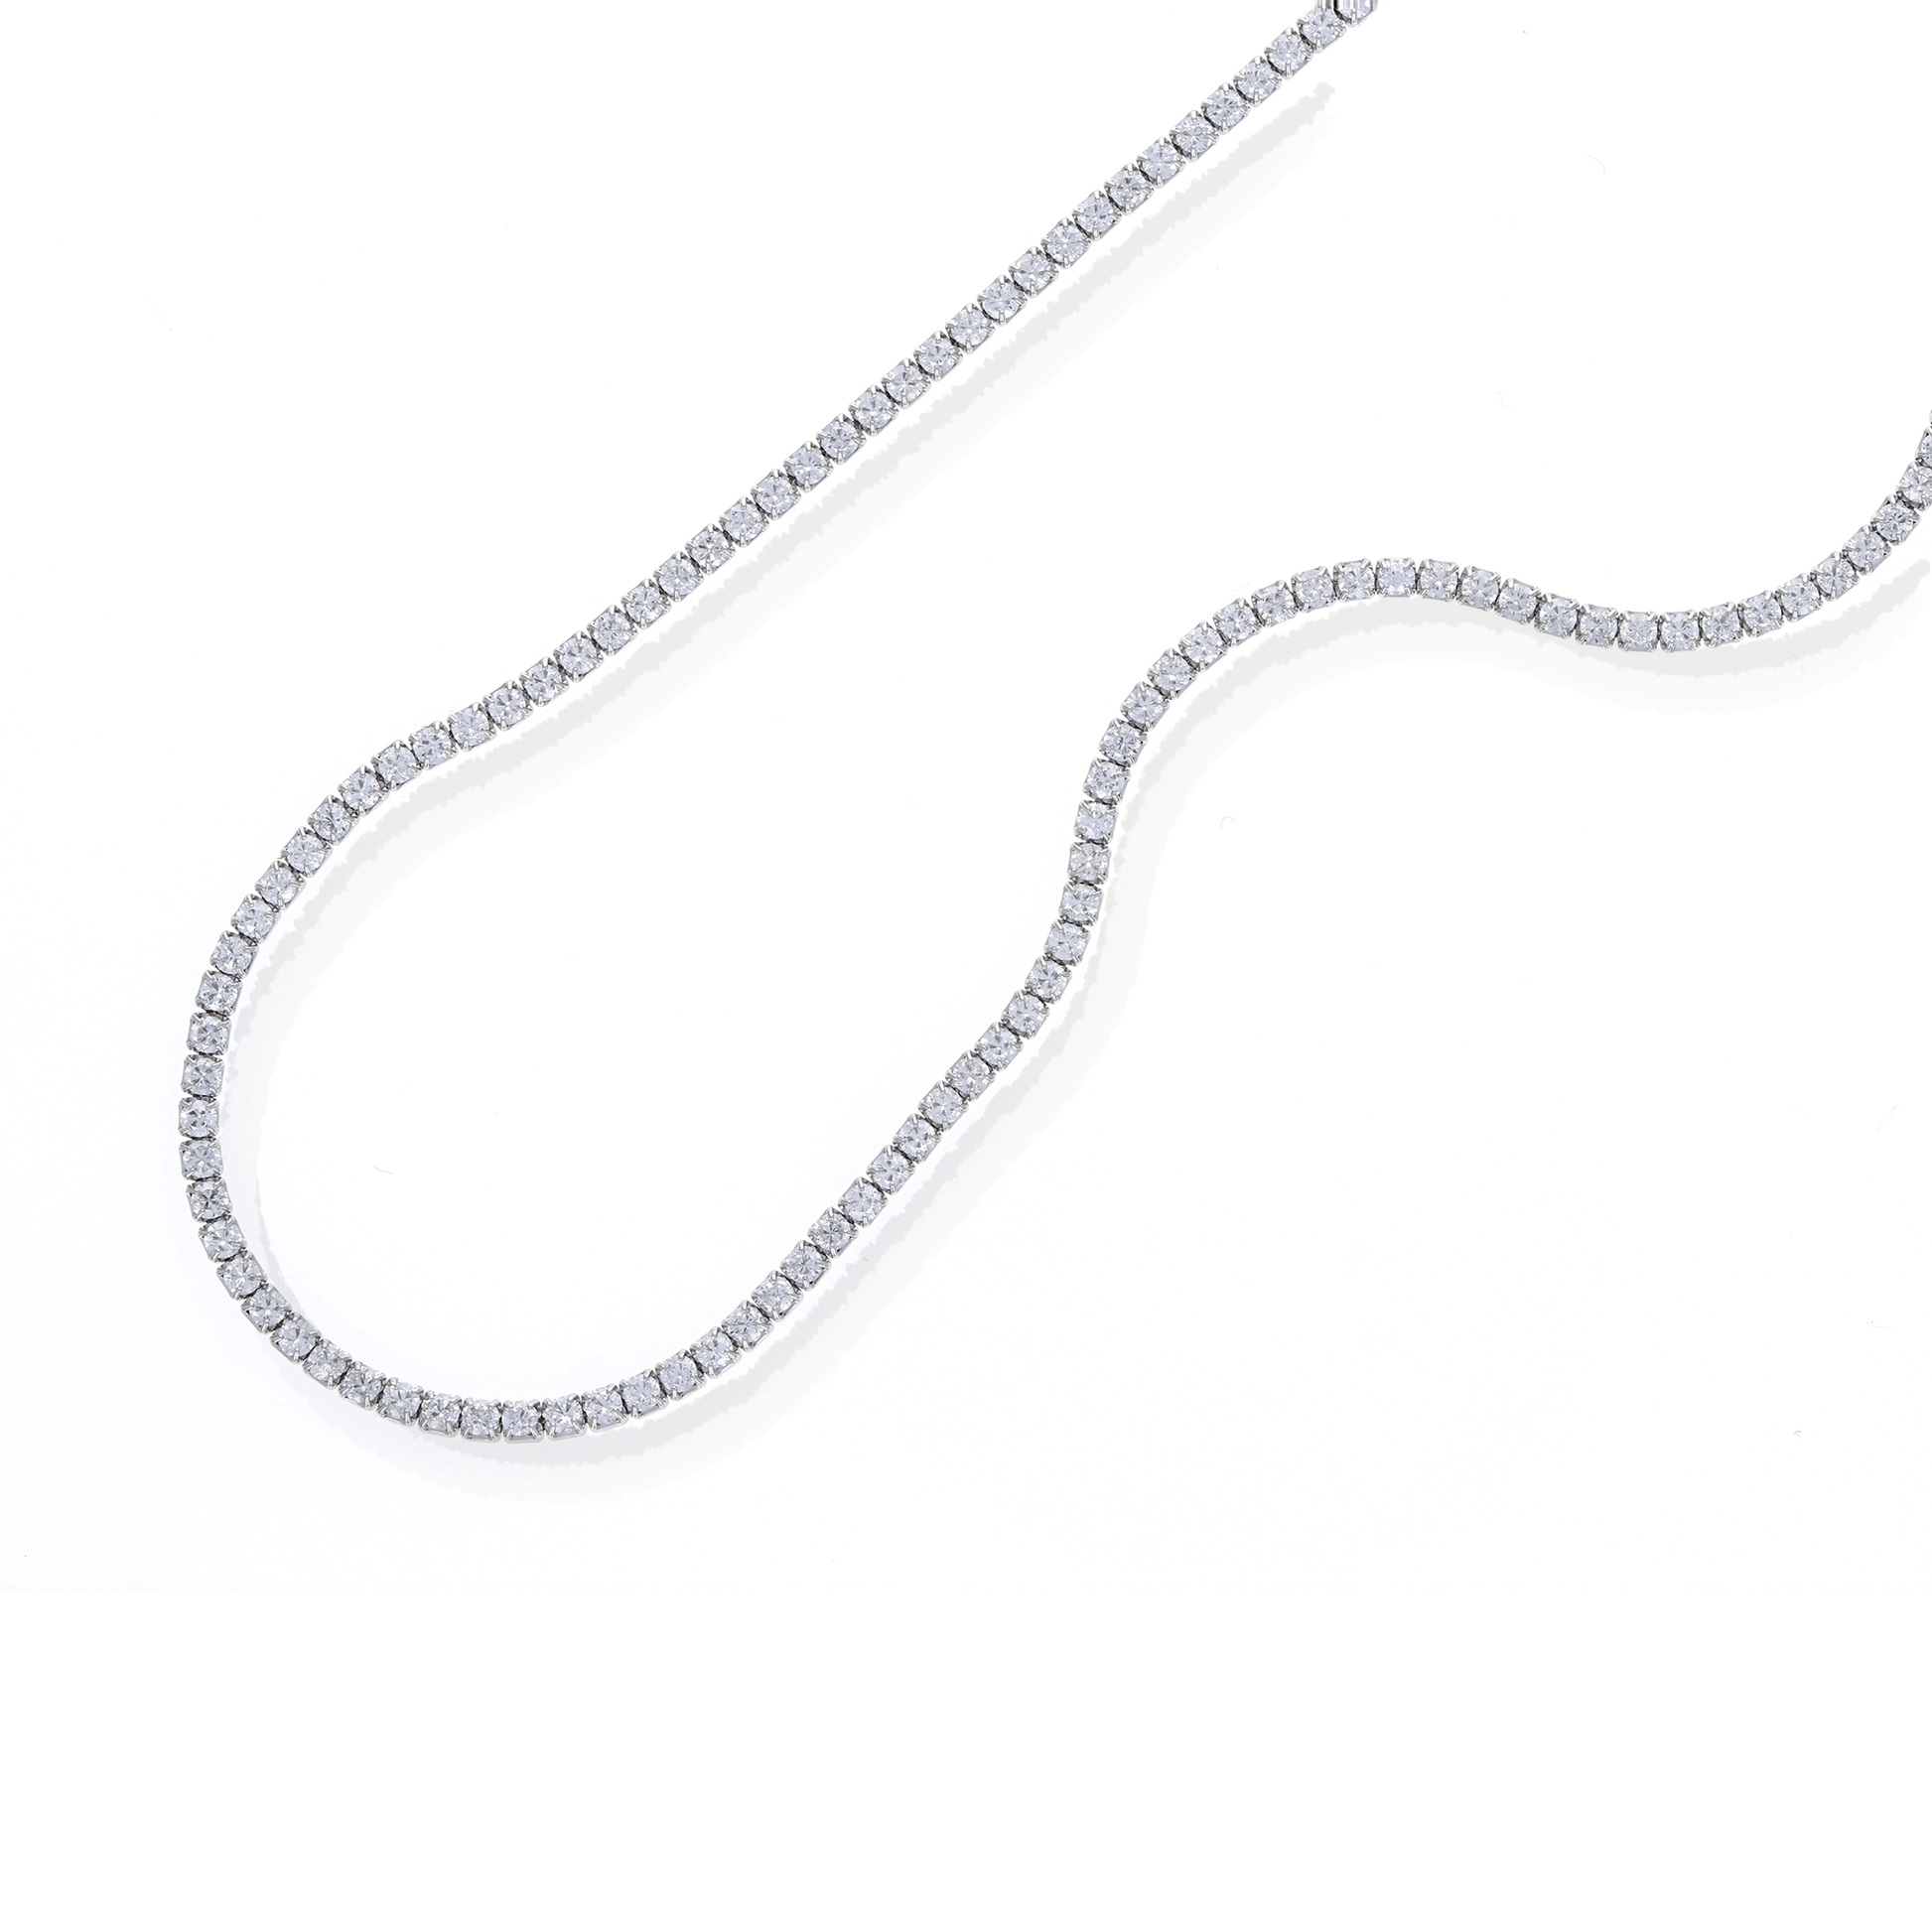 Alexandra Marks | Thin CZ Choker Necklace in Silver